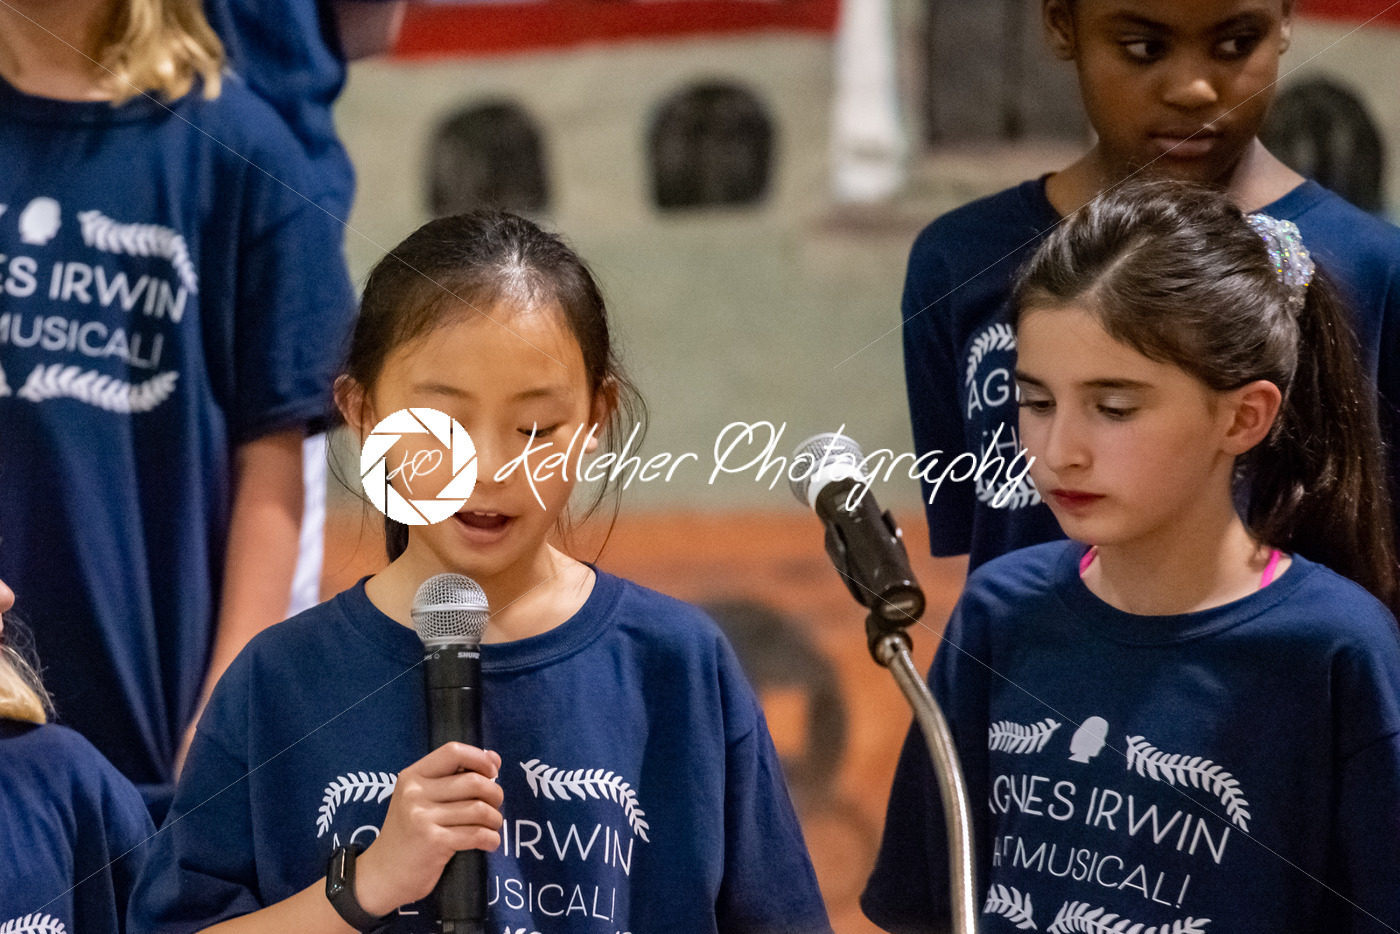 ROSEMONT, PA – MAY 29, 2019: Agnes Irwin: The Musical - Kelleher Photography Store